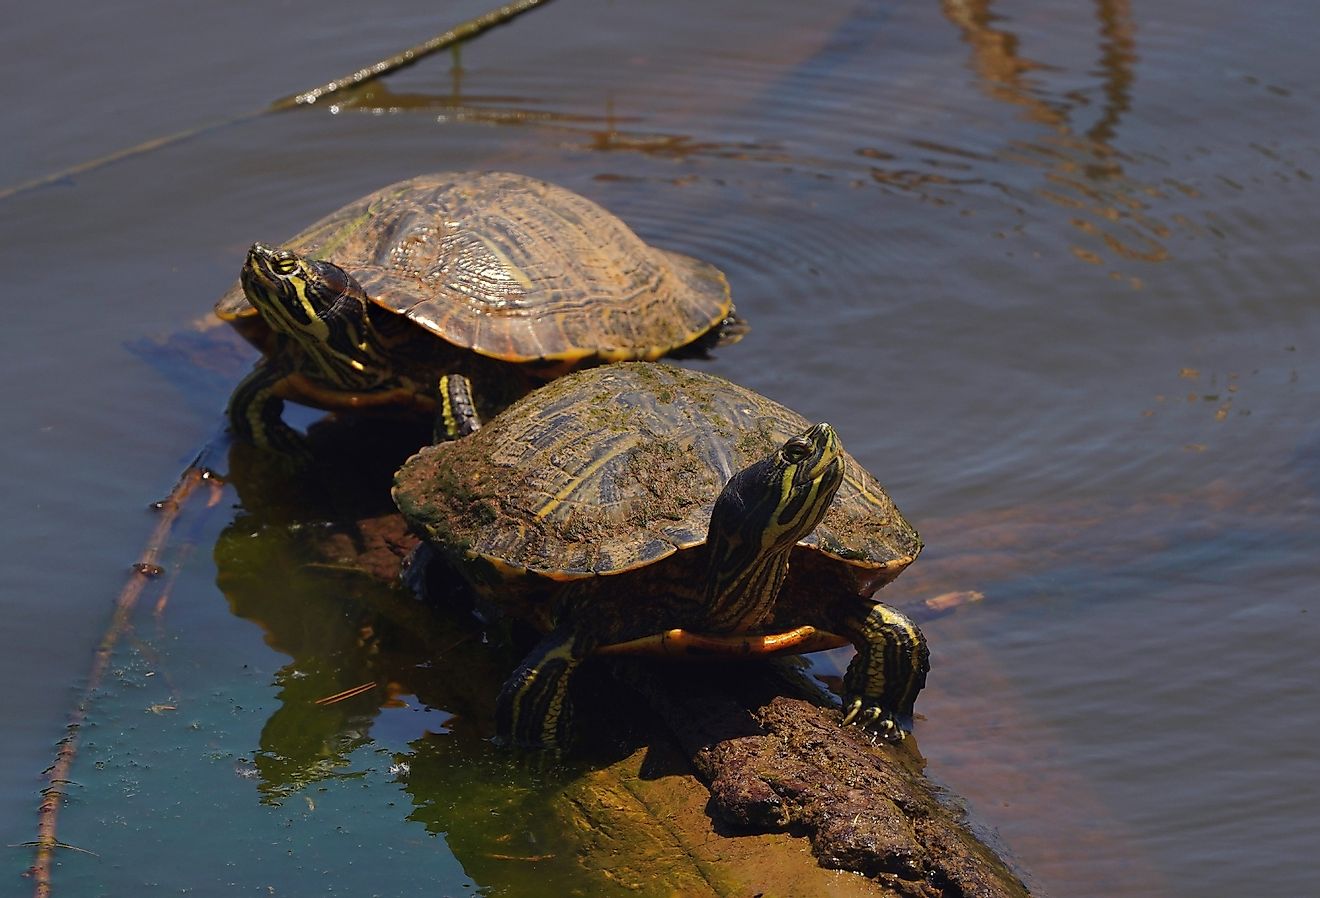 Alabama Red Bellied Turtles catching the morning sunlight.